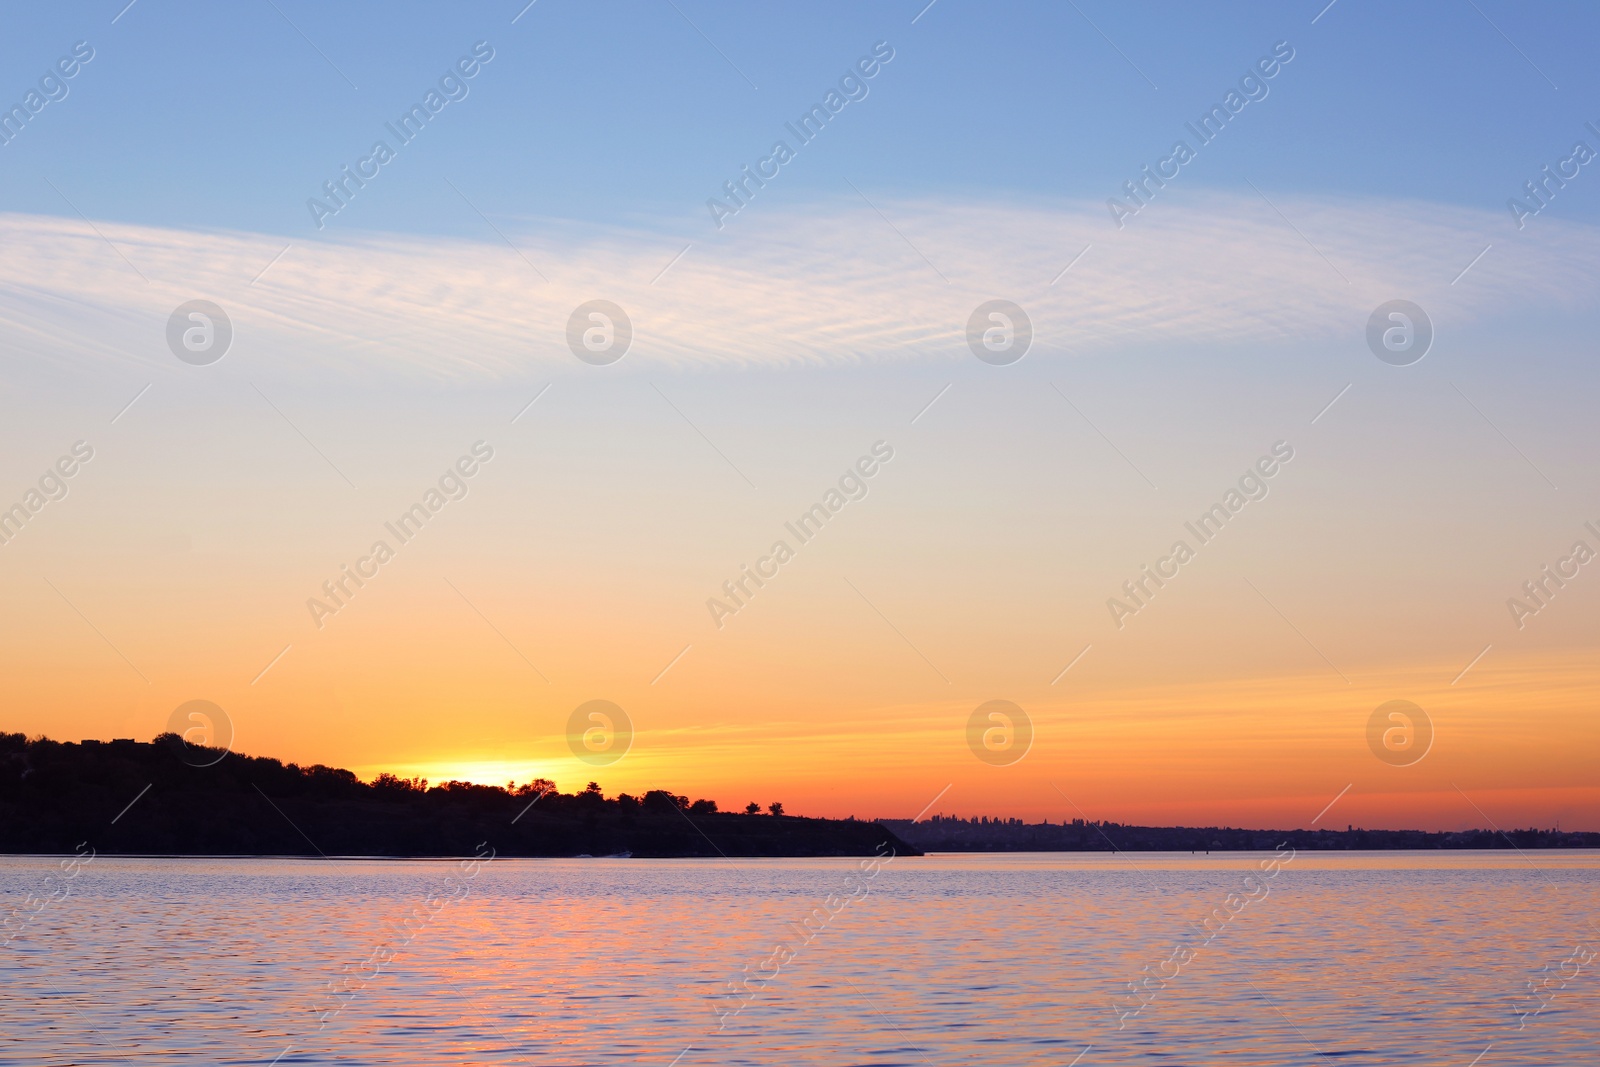 Photo of Picturesque view of beautiful sunset on riverside